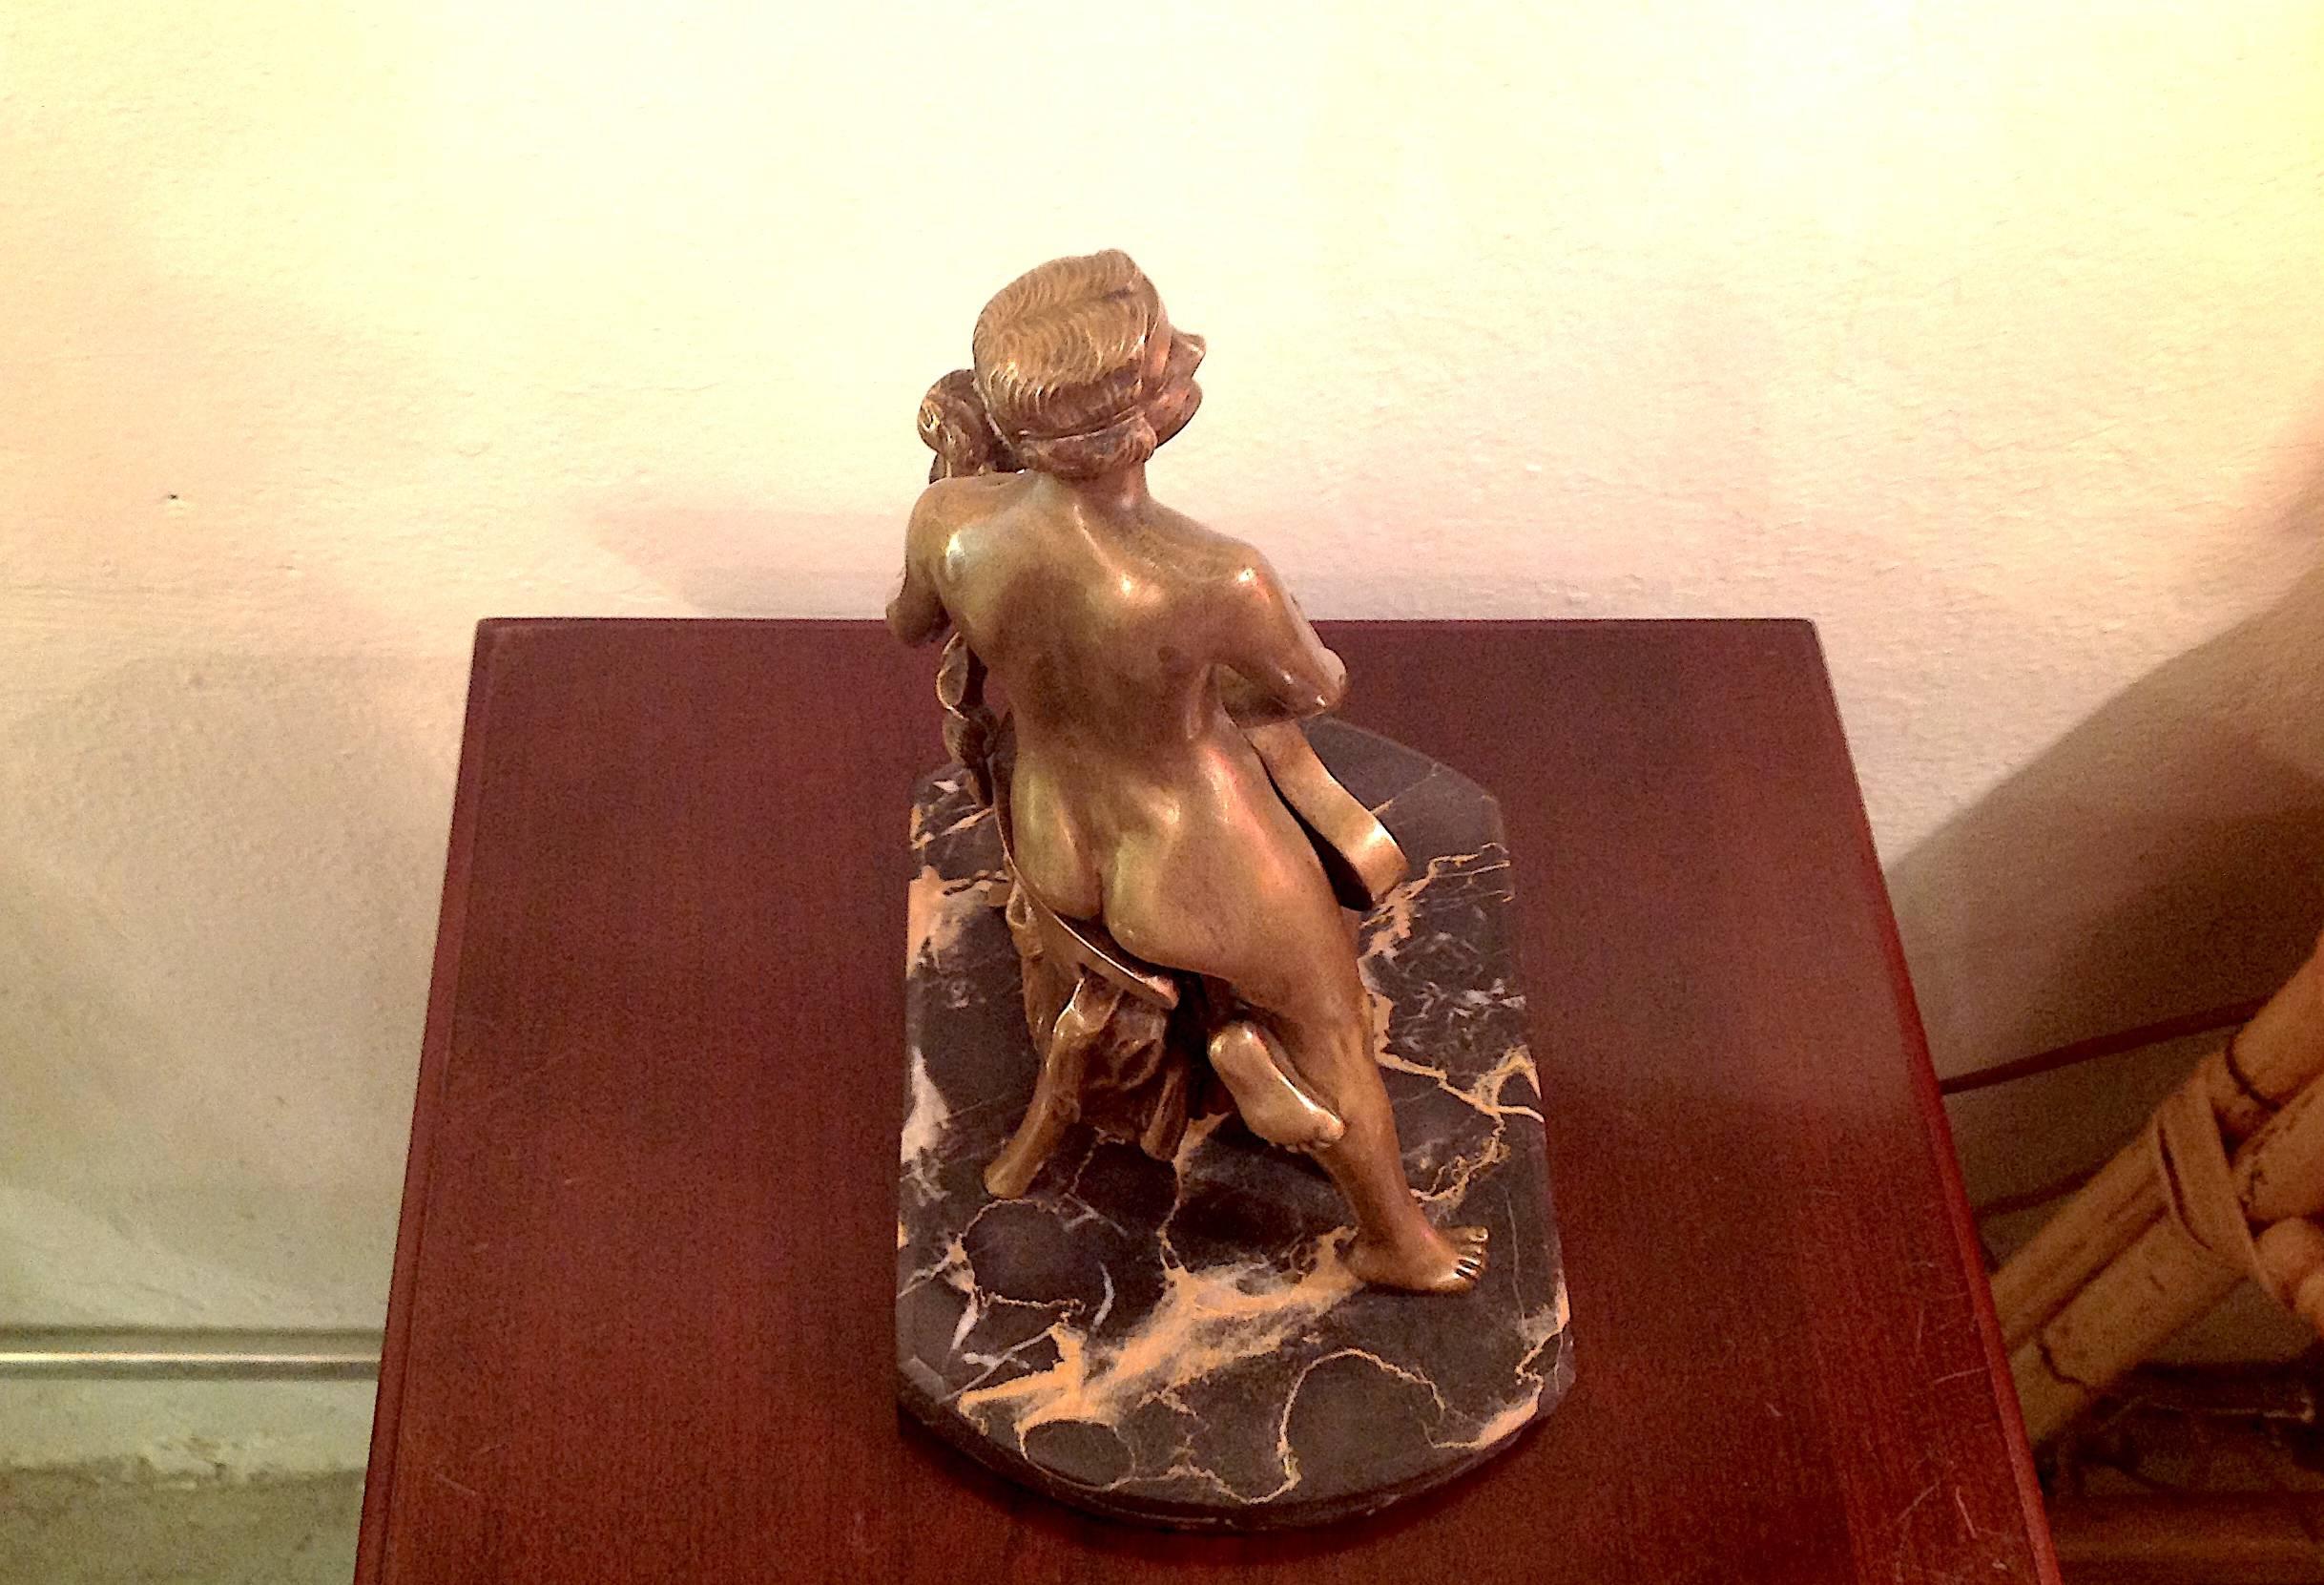 Mid-19th century Art Nouveau, French bronze nude woman with guitar and mask sculpture. Cast in 2 pieces, marble base, original handmade square nuts, measures 9 inches high and 6.5 inches wide. Artist unknown.